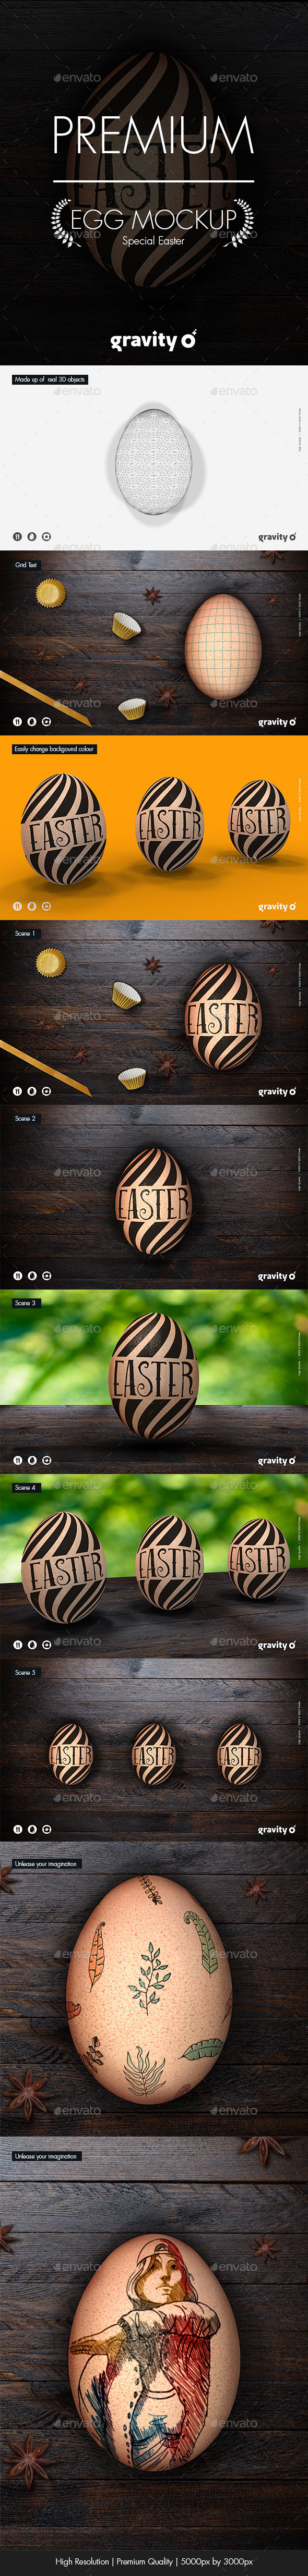 Download Egg Mockup - Easter Edition by howardroussel | GraphicRiver